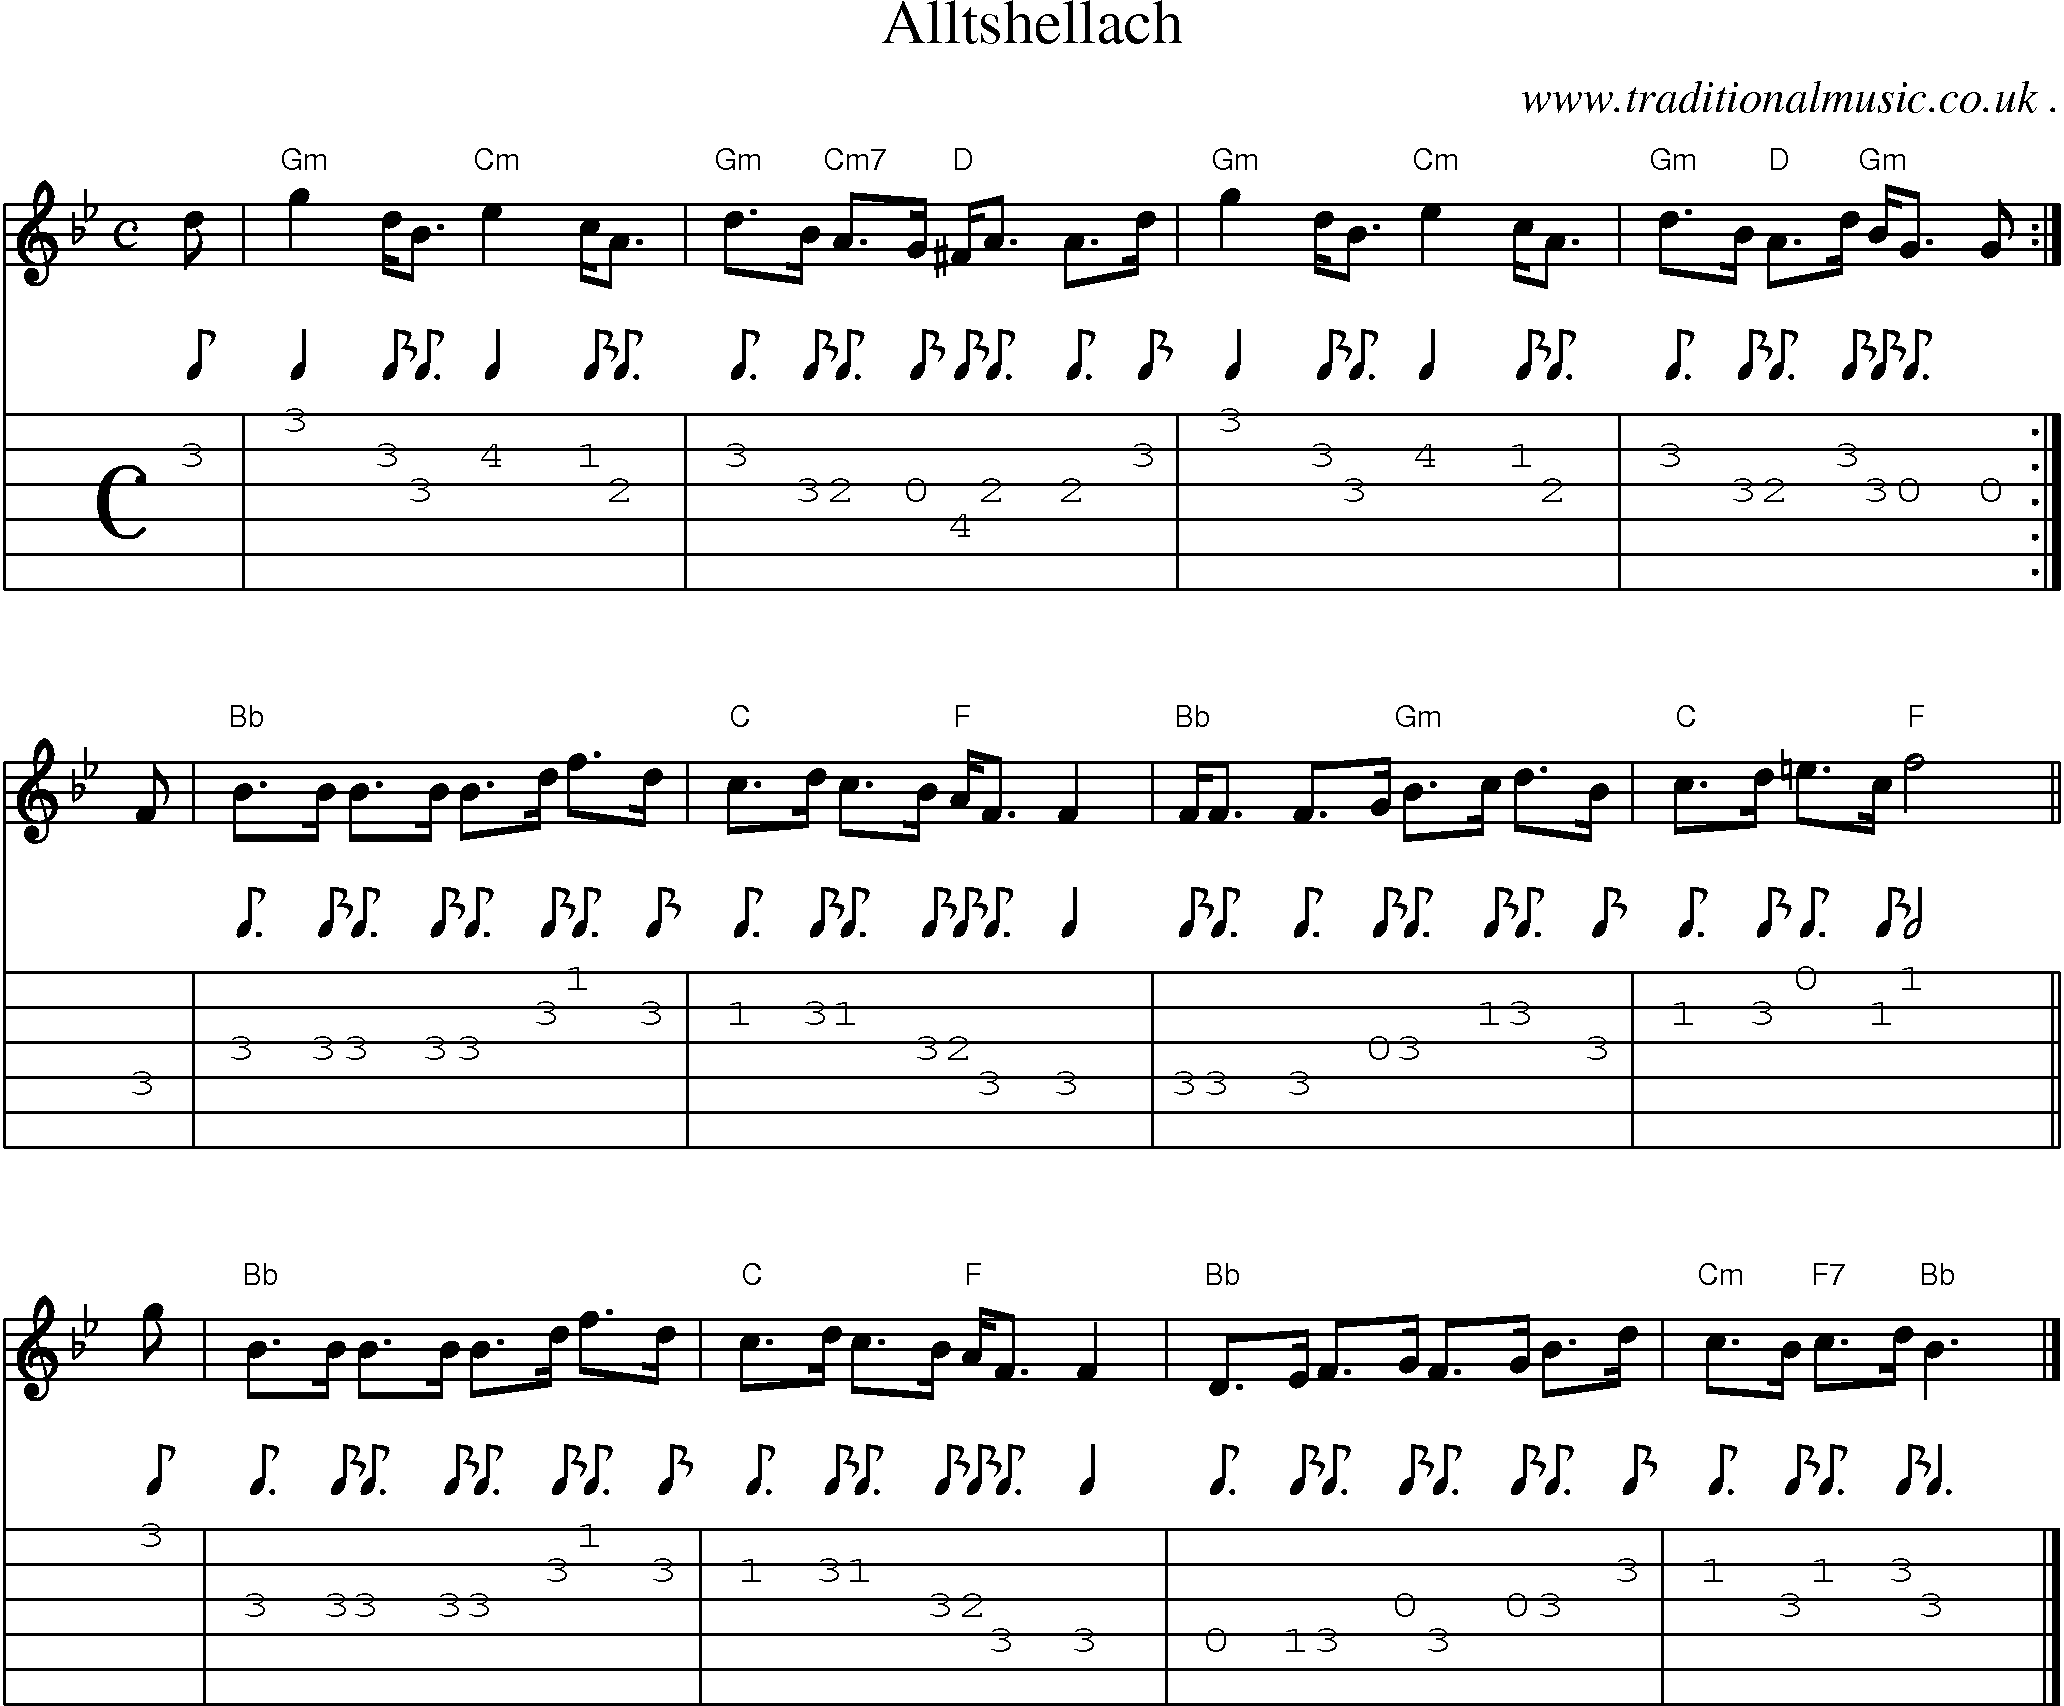 Sheet-music  score, Chords and Guitar Tabs for Alltshellach